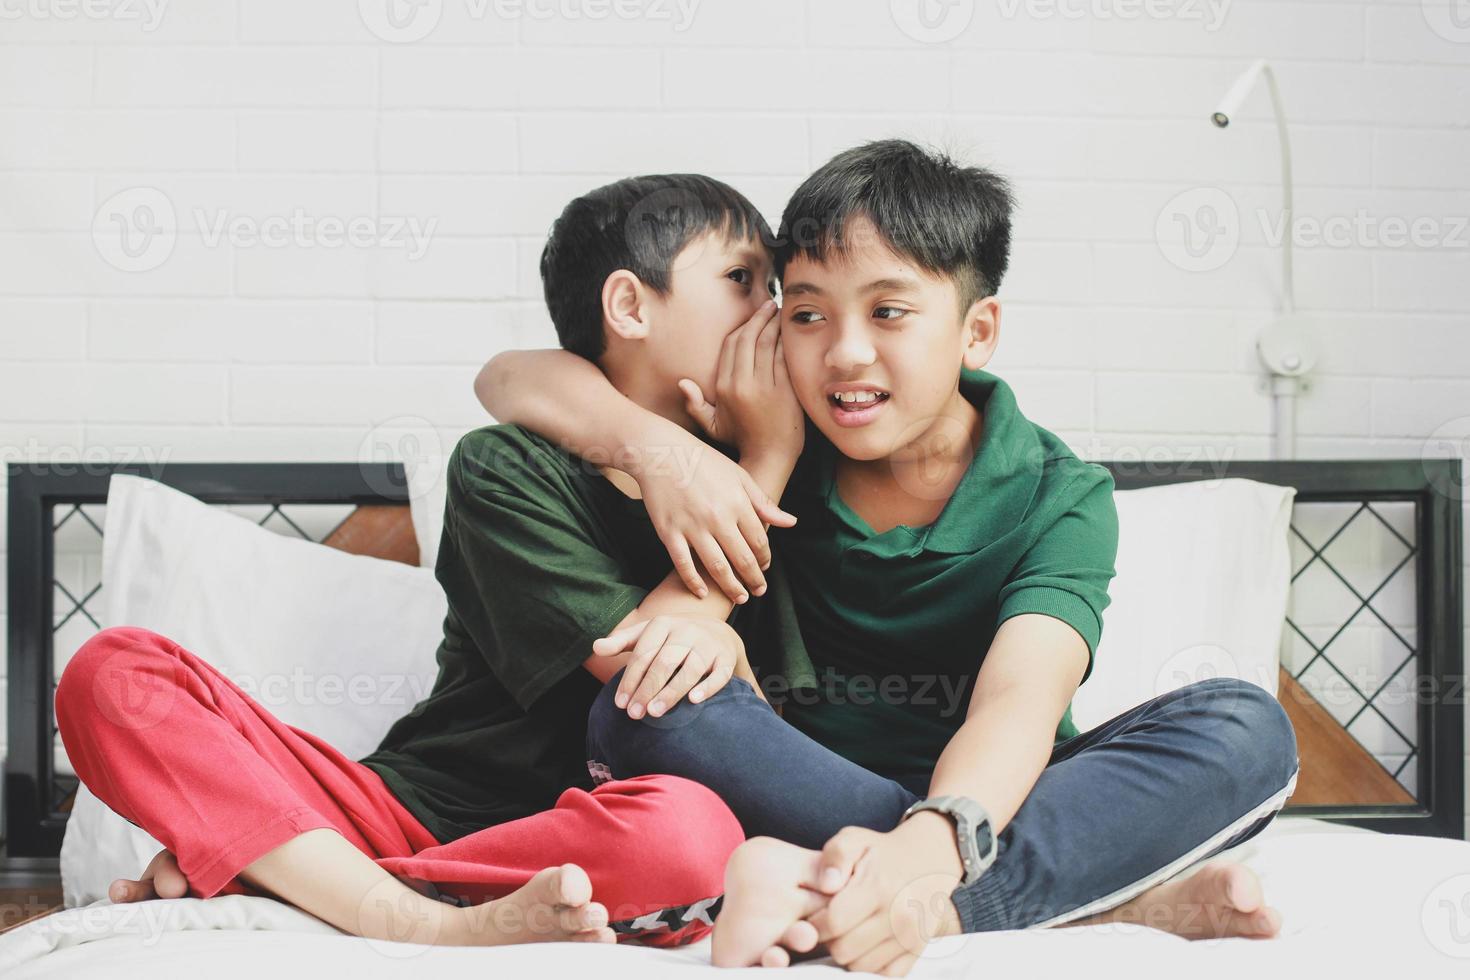 A boy whispered to his brother on the bed photo